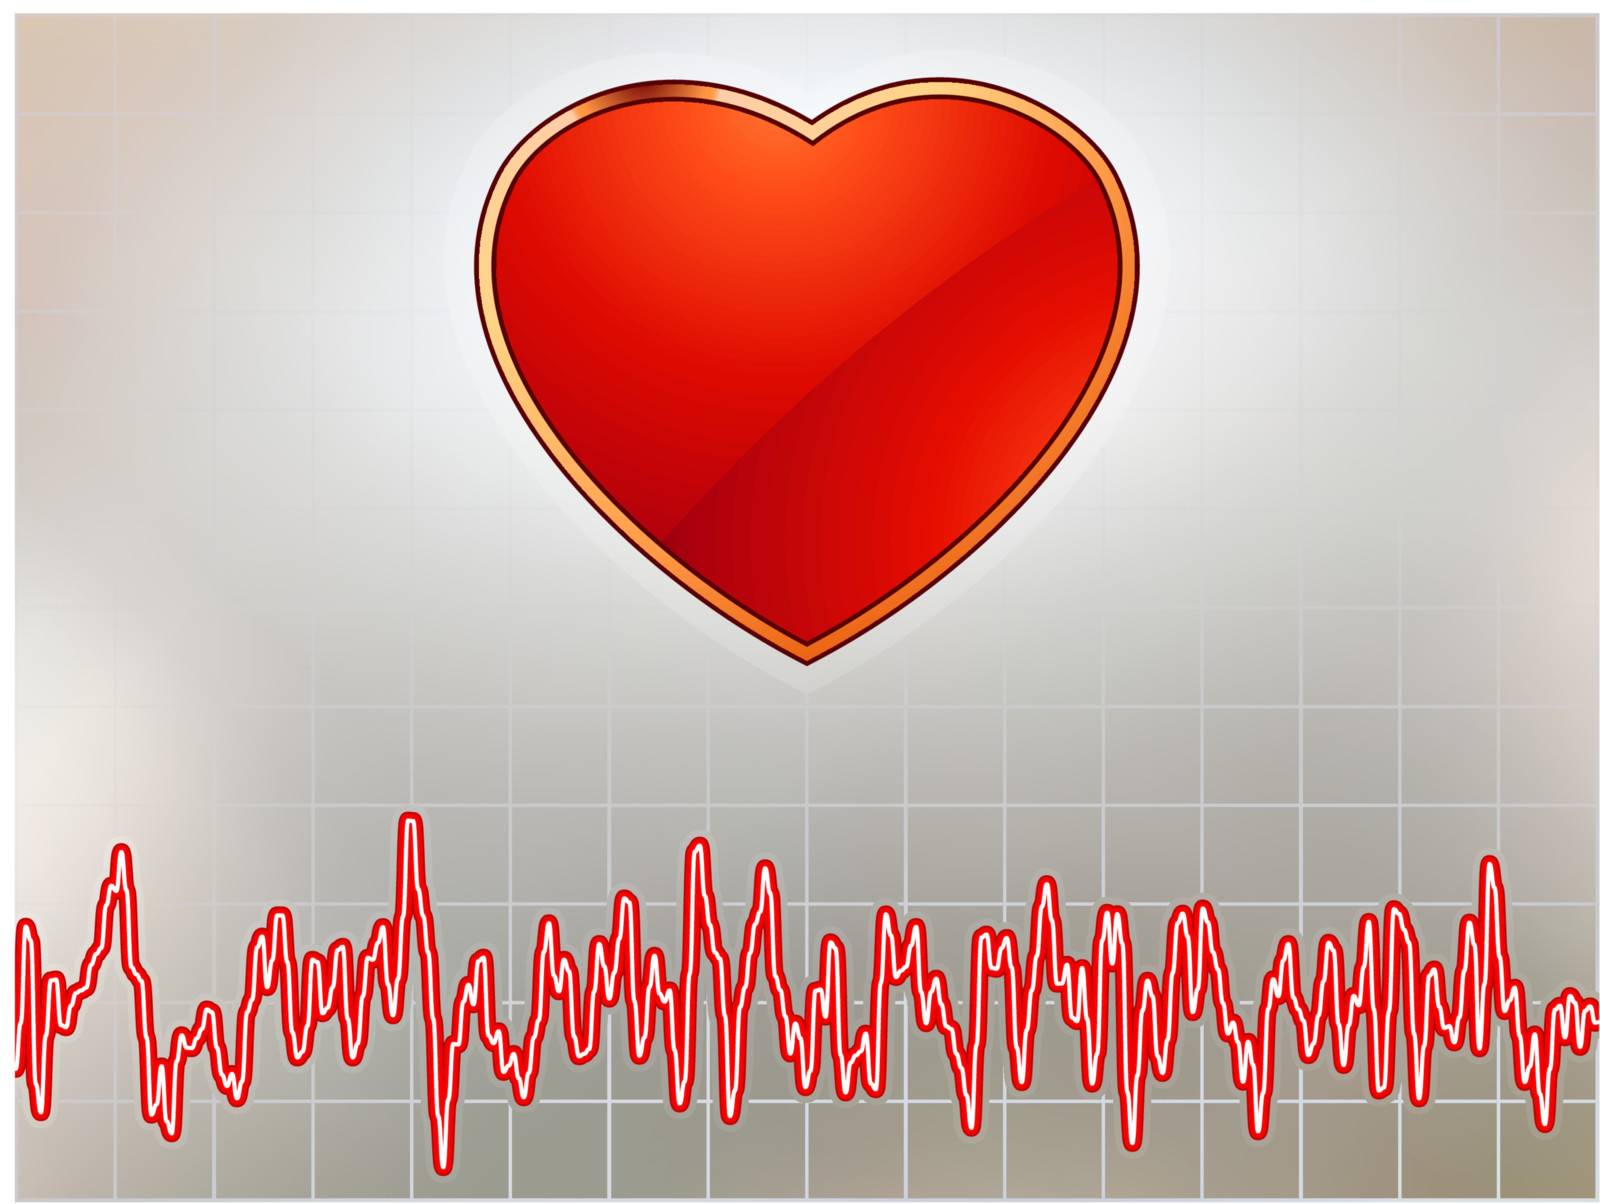 Editable vector background - heart and heartbeat symbol. EPS 8 vector file included